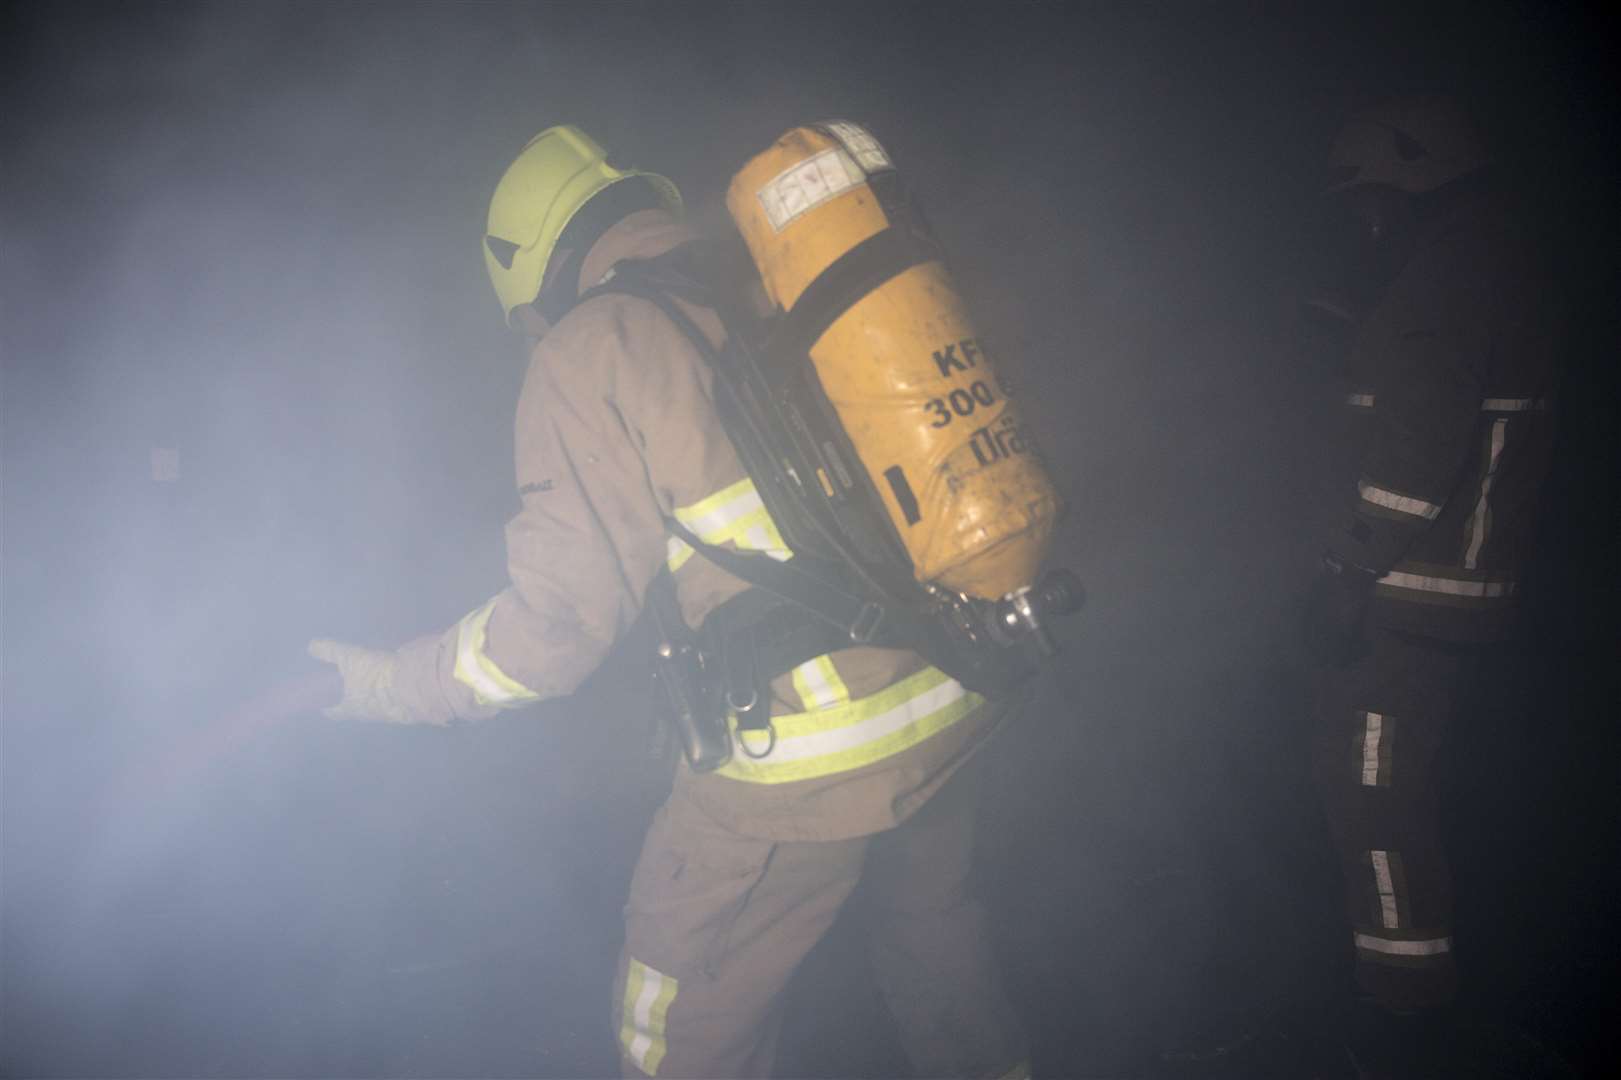 Firefighters tackled the blaze Stock image: Kent Fire & Rescue Service